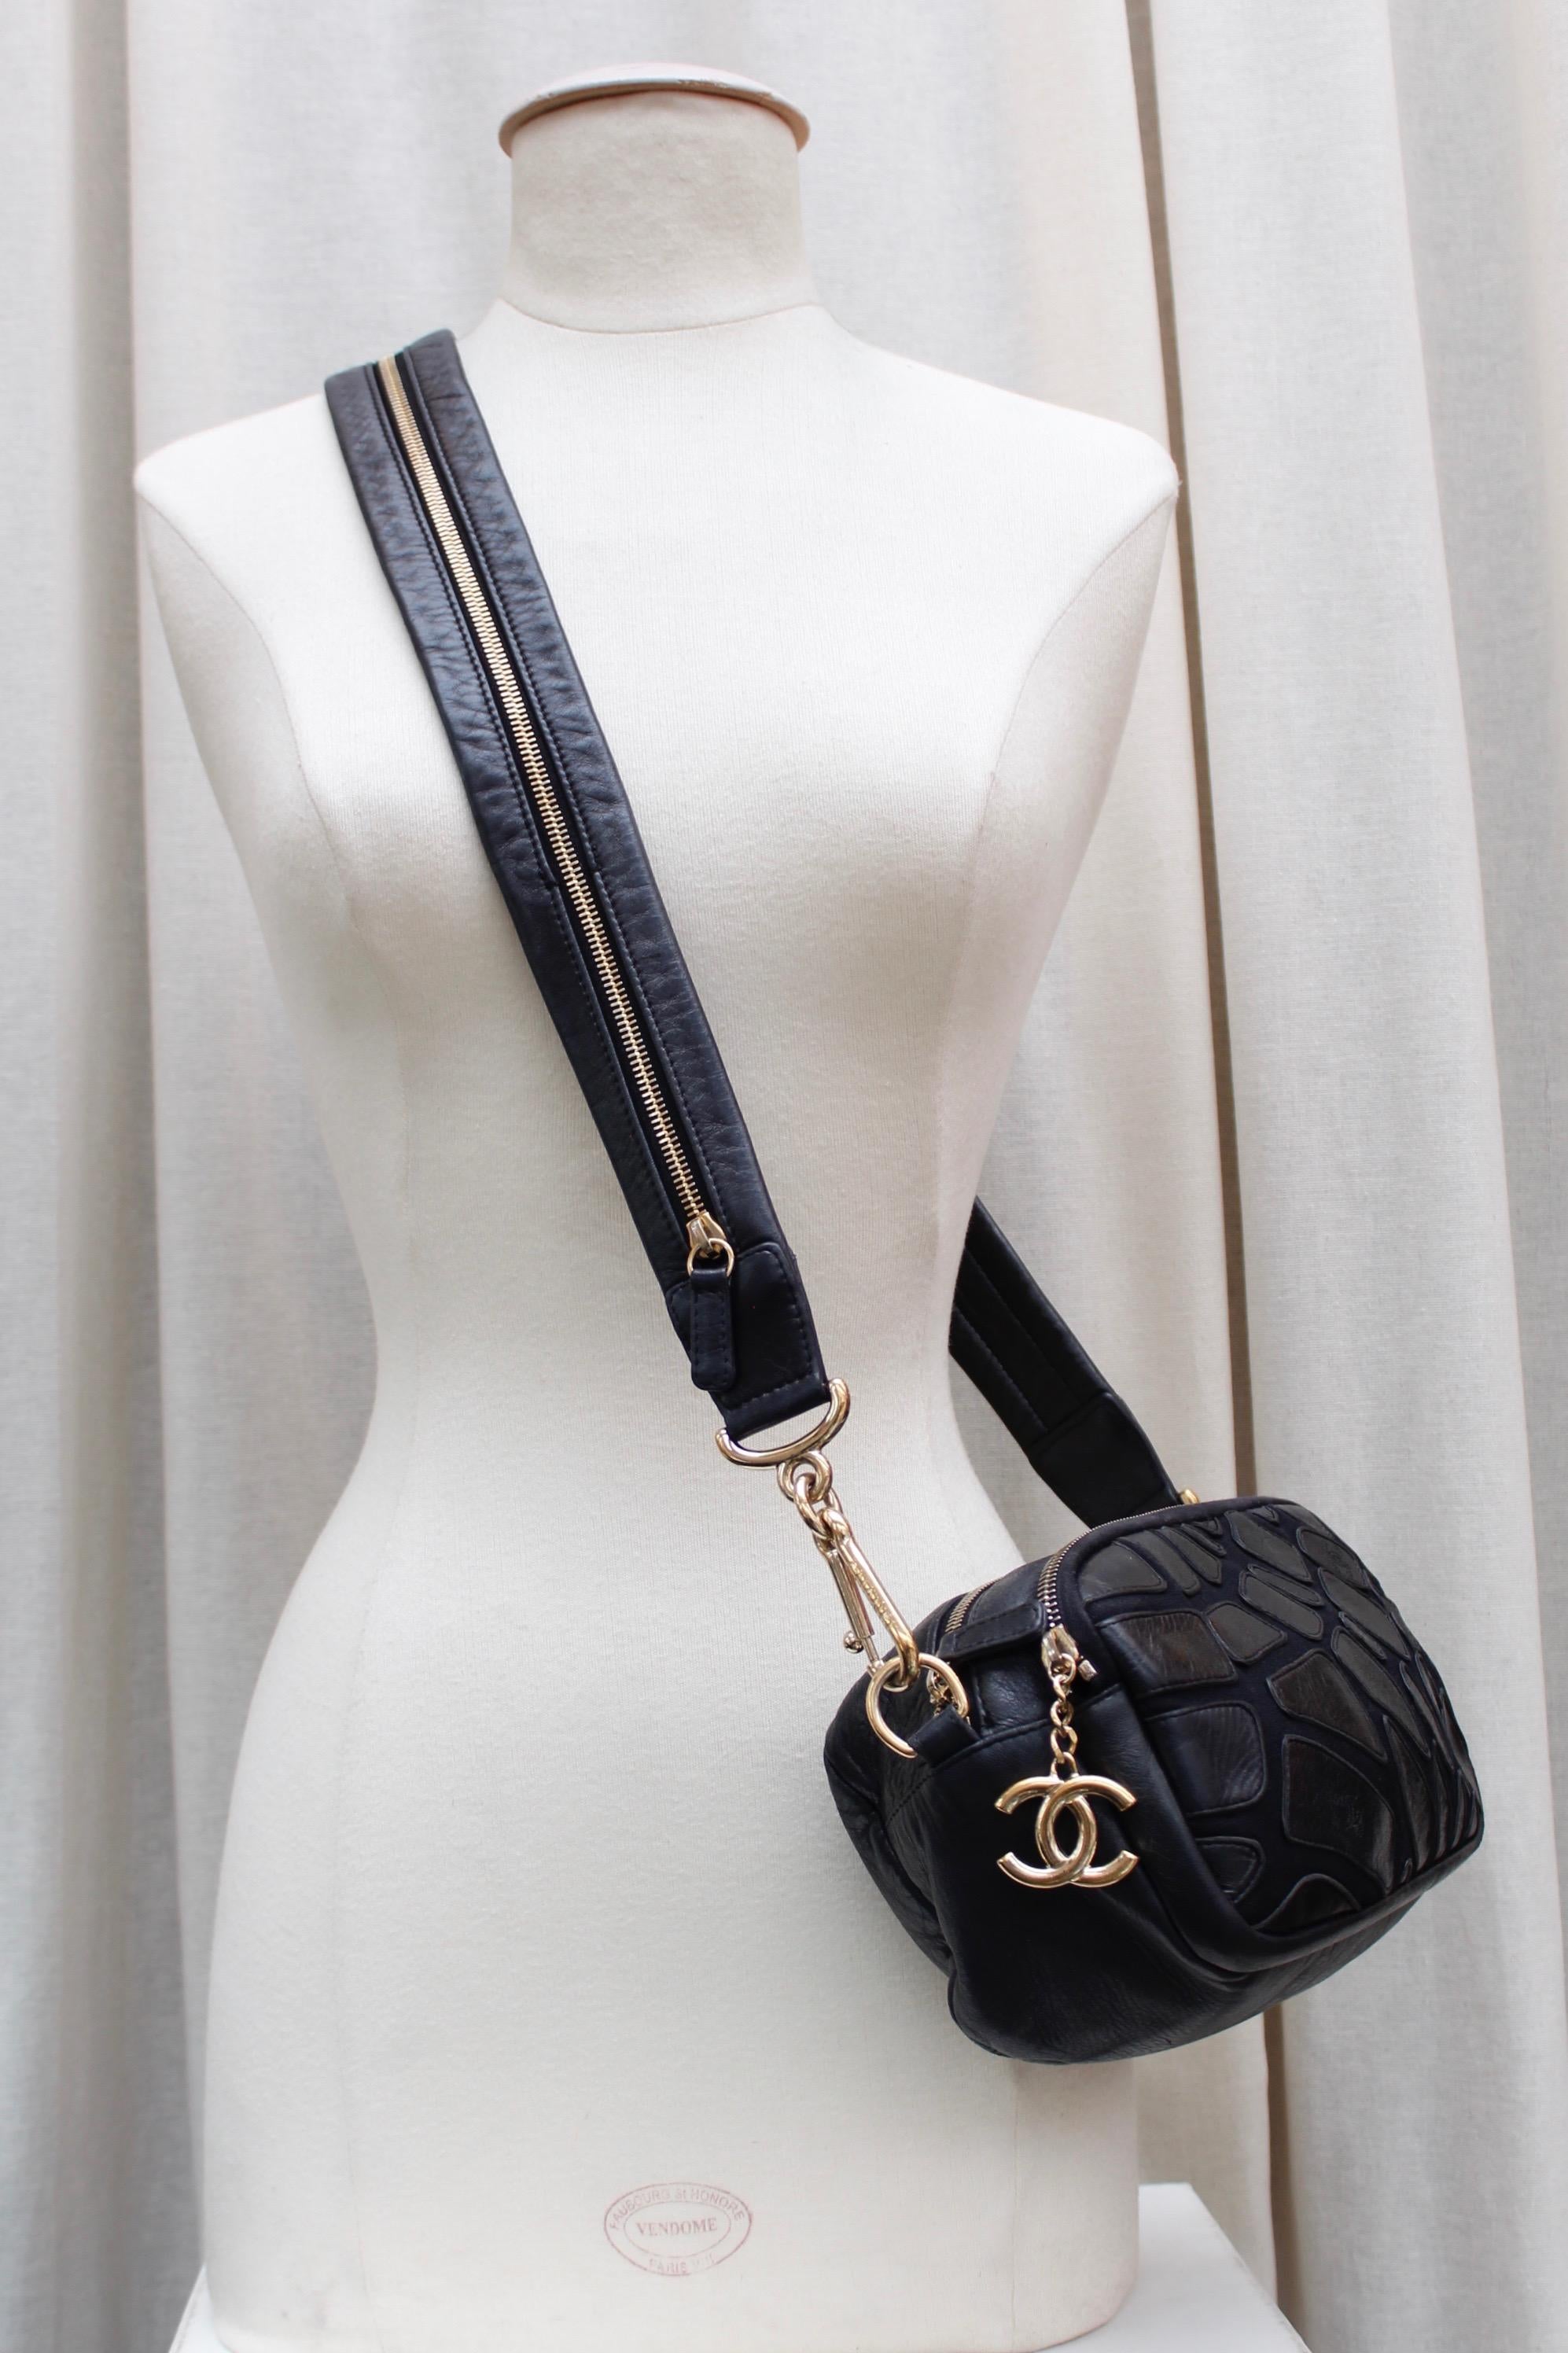 CHANEL (Made in Italy) Small cross-body bag composed of canvas and veal skin. Both faces are decorated with black leather yokes of irregular shape, designed to simulate a wild animal coat. It can be worn cross-body on over the shoulder thanks to its